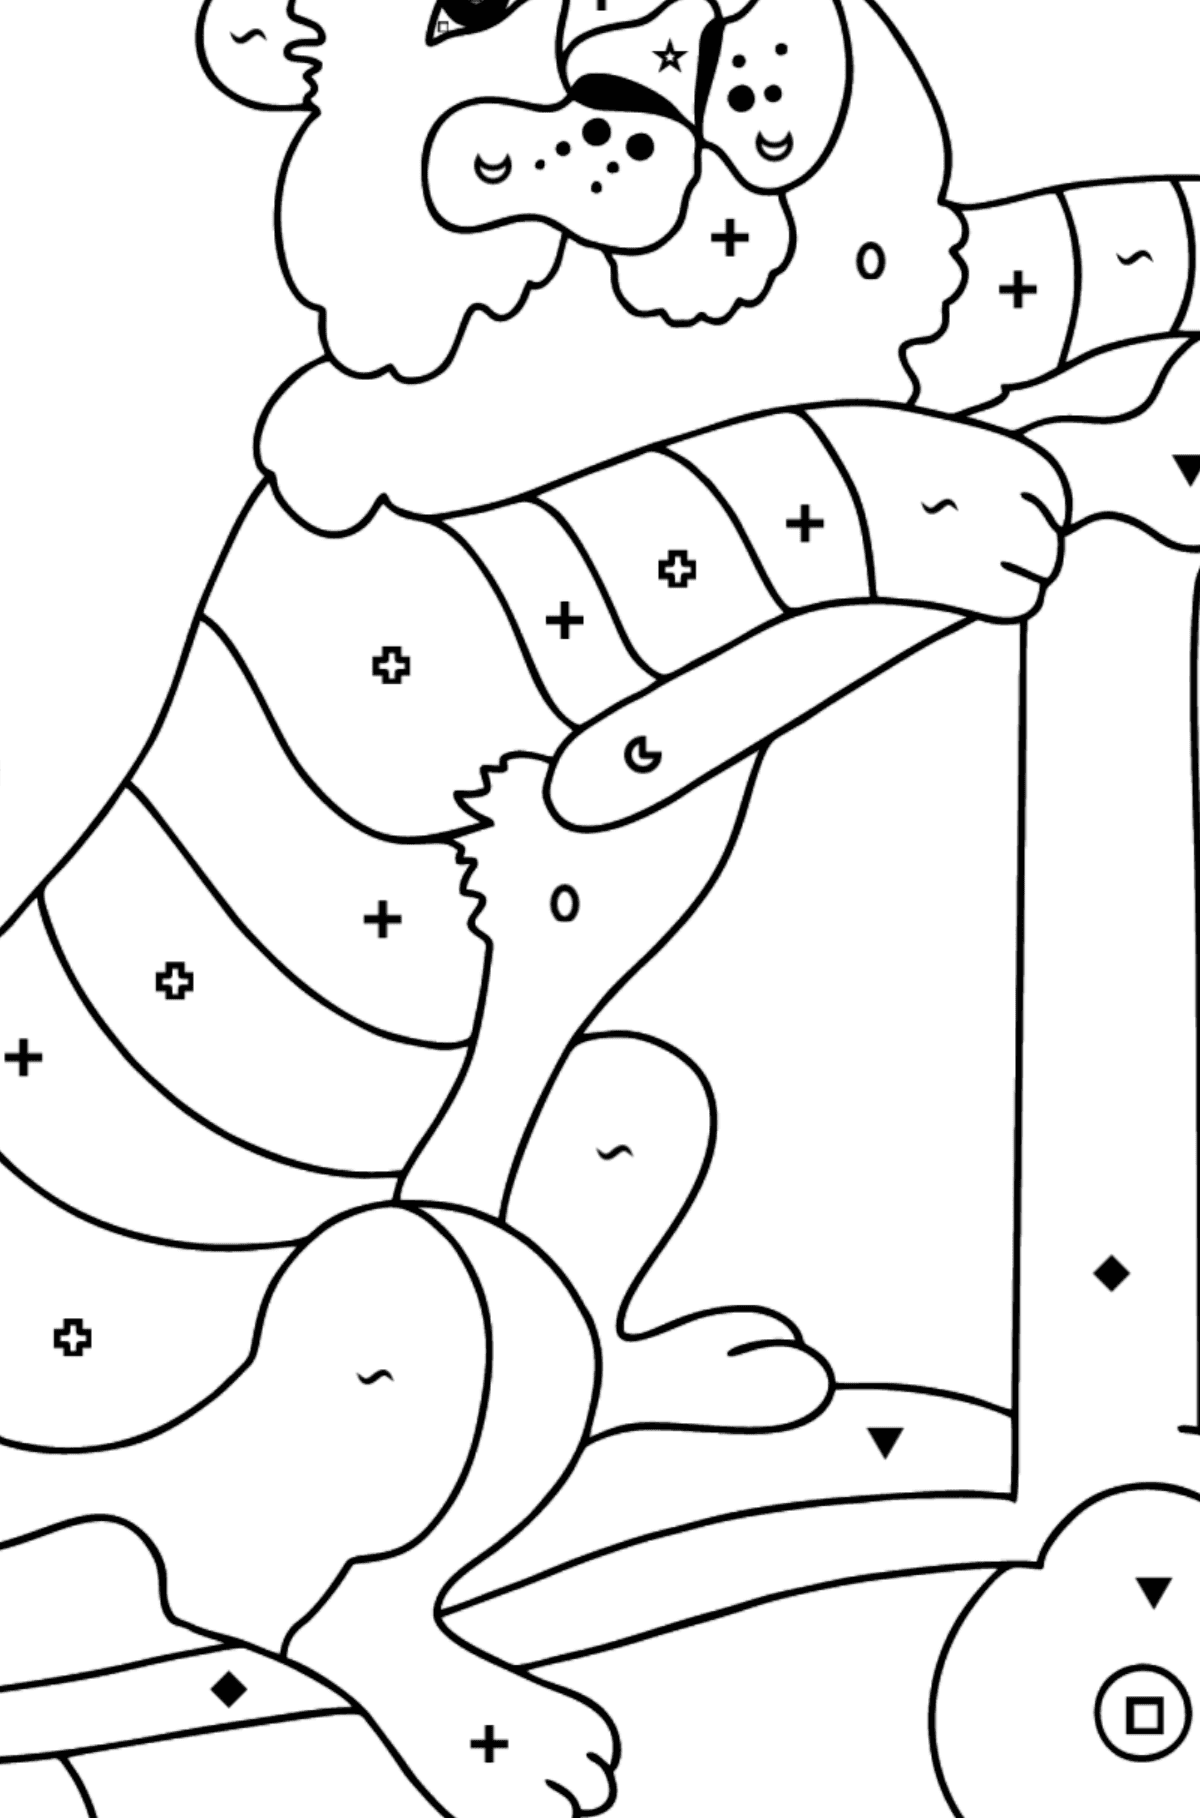 Coloring Page - A Tiger on a Fancy Scooter - Coloring by Symbols and Geometric Shapes for Kids